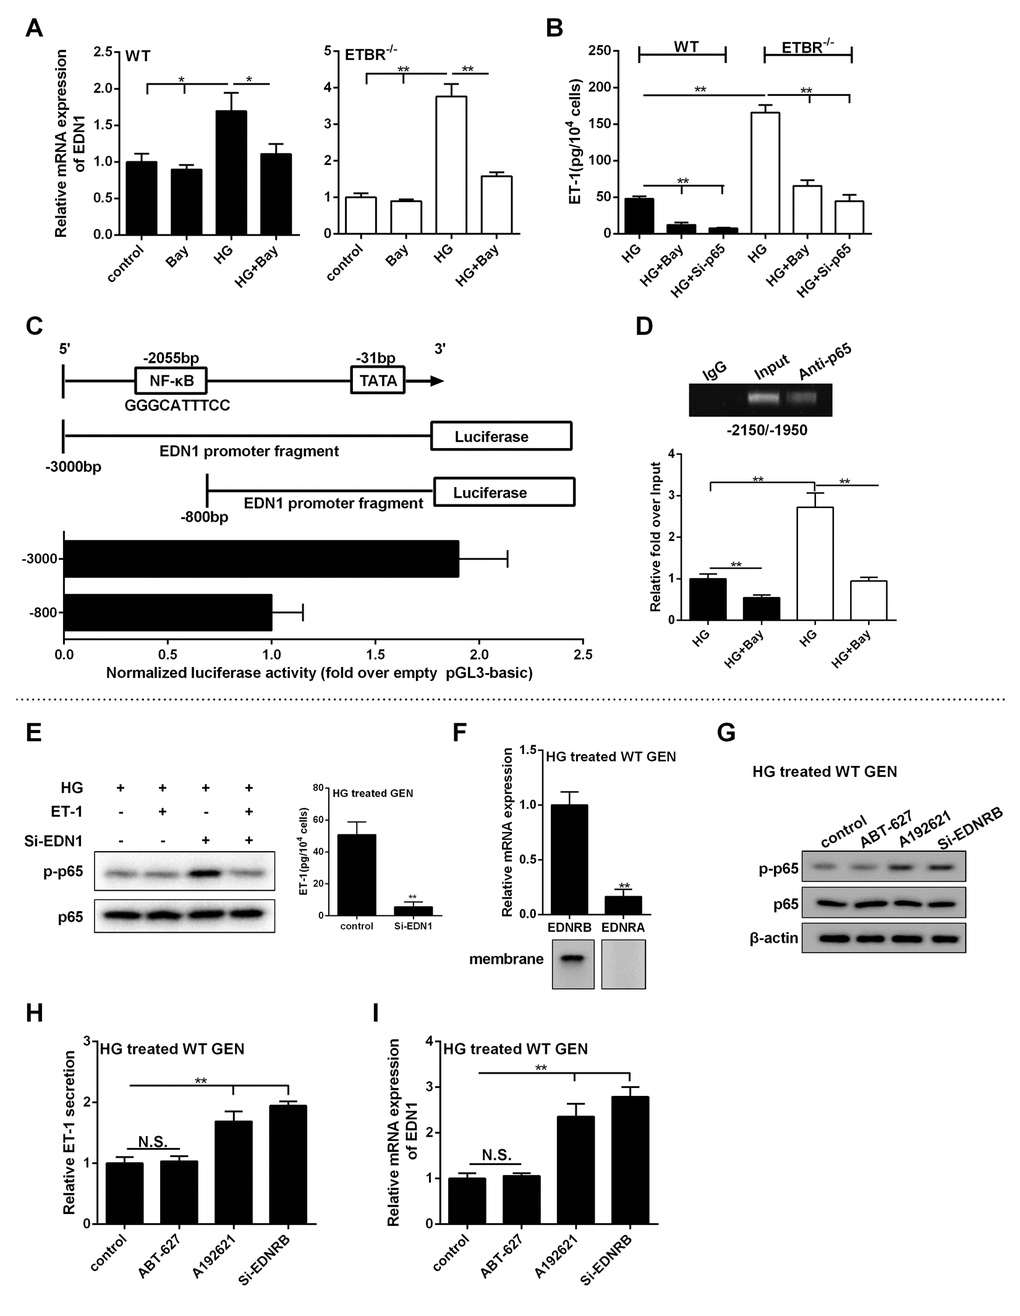 p65 promoted the transcription of EDN1, and ET-1/ETBR modulated ET-1 through NF-kappaB. (A) WT GENs or ETBR-/- GENs were treated with HG or 10 μM Bay or HG+10 μM Bay for 24 h. mRNA expressions of EDN1 in WT or ETBR-/- GENs were detected in control, Bay, HG, HG+Bay groups. *pB) Extracellular secretion of ET-1 was detected in HG, HG+Bay and HG+si-p65 groups. **pC) CHO cells were co-transfected with p65-expressing vector and pGL3 vector carrying different promoters of EDN1, and empty pGL3 basic was used as control. After 48 h of transfection, EDN1 promoter activity was detected by dual-Luciferase Reporter Assay System. (D) WT or ETBR-/- GENs were treated with HG or HG+10 μM Bay for 24 h. ChIP assay showed p65 could bind with the segments at this region in HG-treated GENs. Under HG condition, inhibition of NF-kappaB significantly decreased the binding efficiency of this region. **pE) After GENs treated with HG for 6 h, 1 nM ET-1 was added into GENs and cultured for 18 h. So, GENs was treated with HG for 24 h in total. ET-1 secretion in GENs was detected in control and si-EDN1 group. p-p65 expression was detected in HG group, HG+ET-1 group, HG+si-EDN1 group, and HG+ET-1+si-EDN1 group. **pF) After WT GENs treated with HG for 24 h, mRNA level of ETAR and ETBR were detected in HG treated WT GENs. ETAR and ETBR protein levels were detected in the membrane of WT GENs. **pG-I) WT GENs were treated with HG, ABT-627 (25 μM), or A192621 (25 μM) for 24 h. Or WT GENs were transfected with 100 nM si-ETBR, then treated with HG for 24 h. p-p65 and p65 protein levels, ET-1 secretion level and EDN1 mRNA expression were detected in control, ABT-627, A192621 and si-ETBR groups.**p